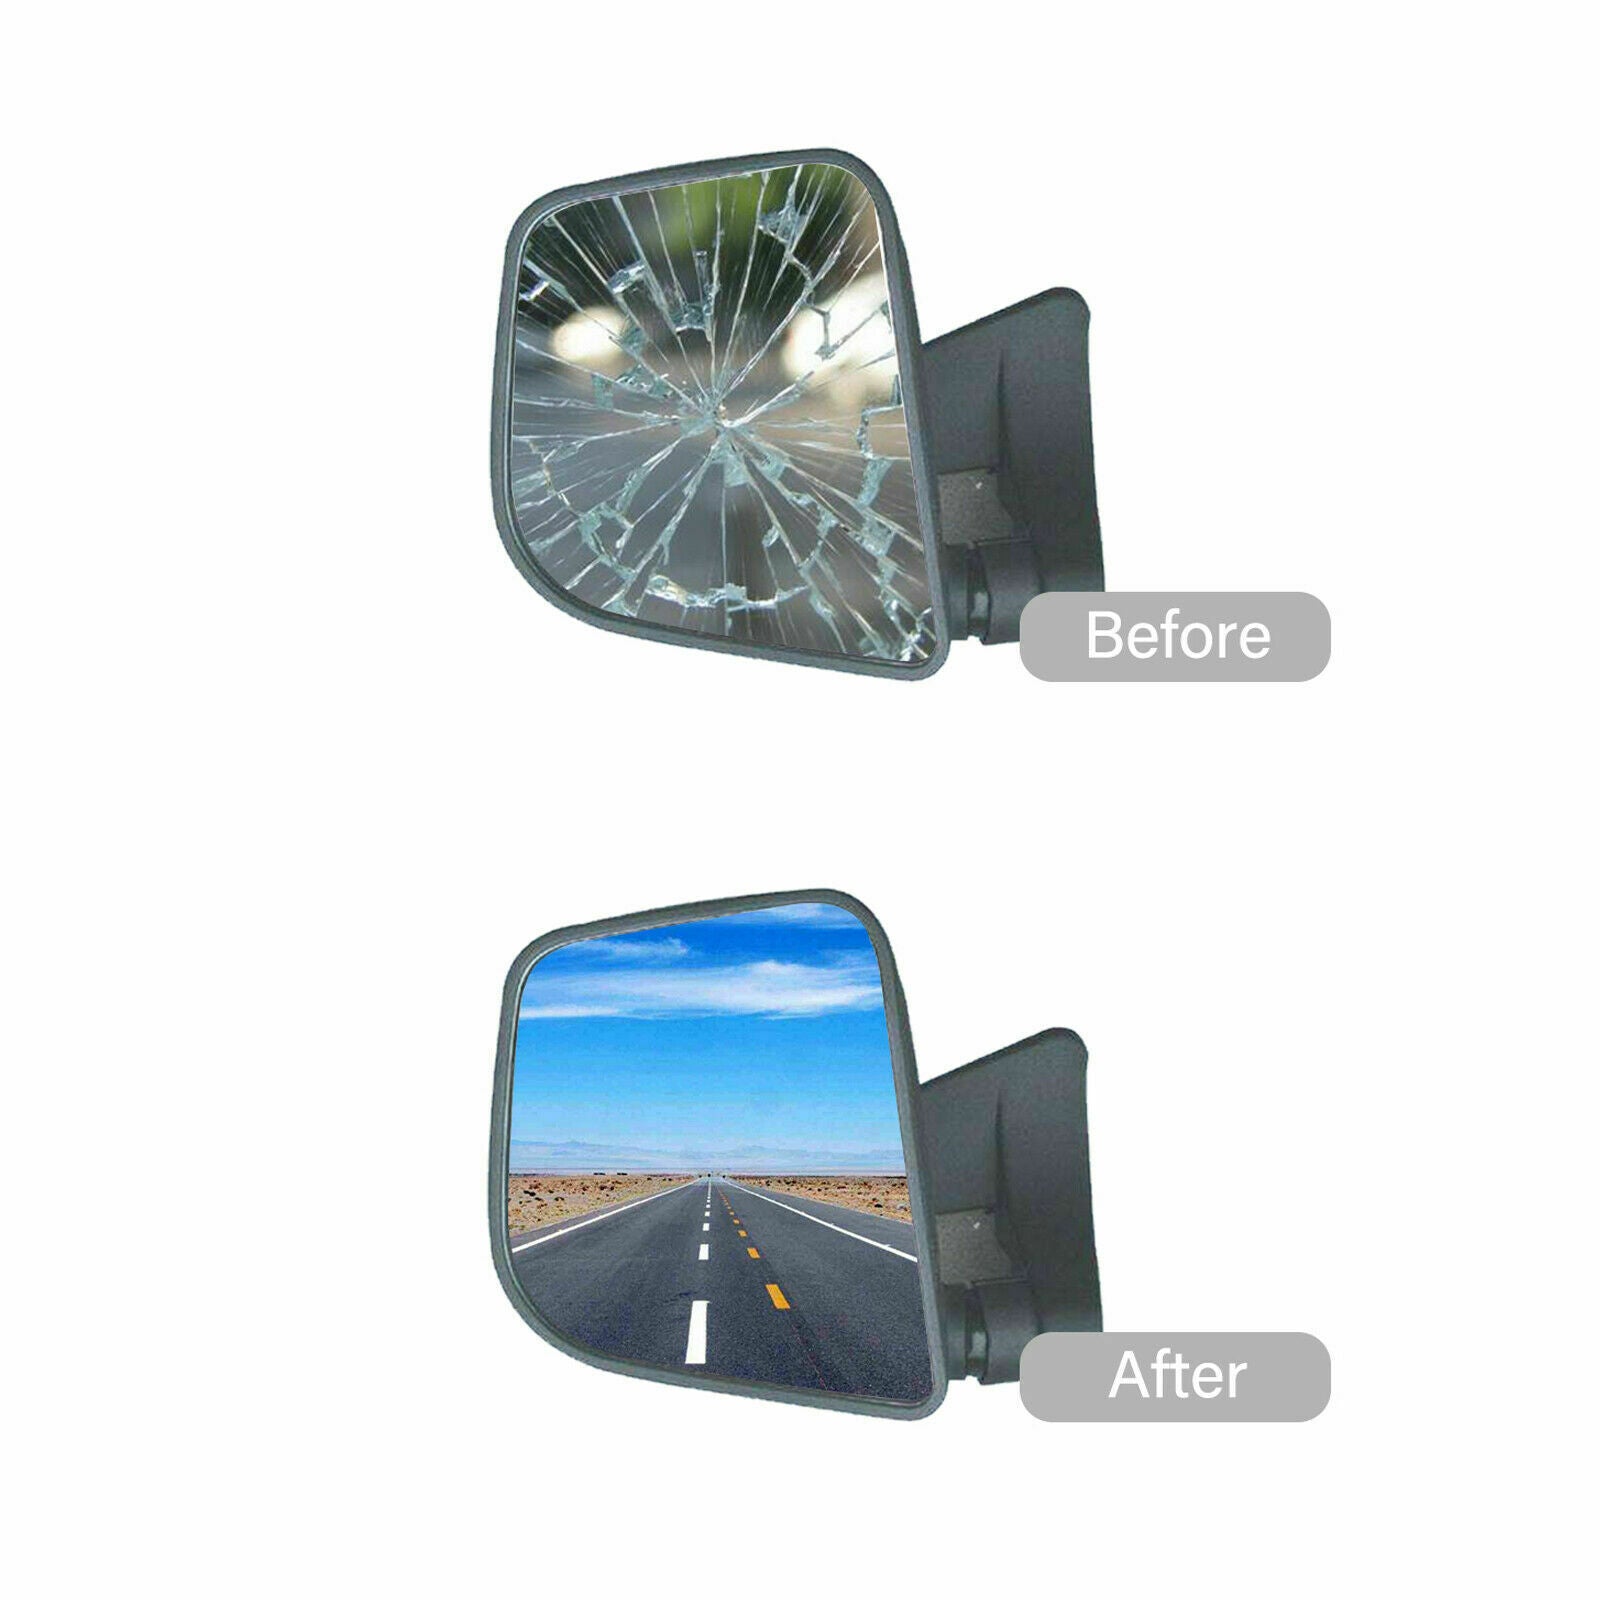 WLLW Replacement Mirror Glass for Lexus 2004-2006 RX330/2007-2009 RX350/2006-2008 Lexus RX400H, Driver Left Side LH/Passenger Right Side RH/The Both Sides Flat Convex M-0069